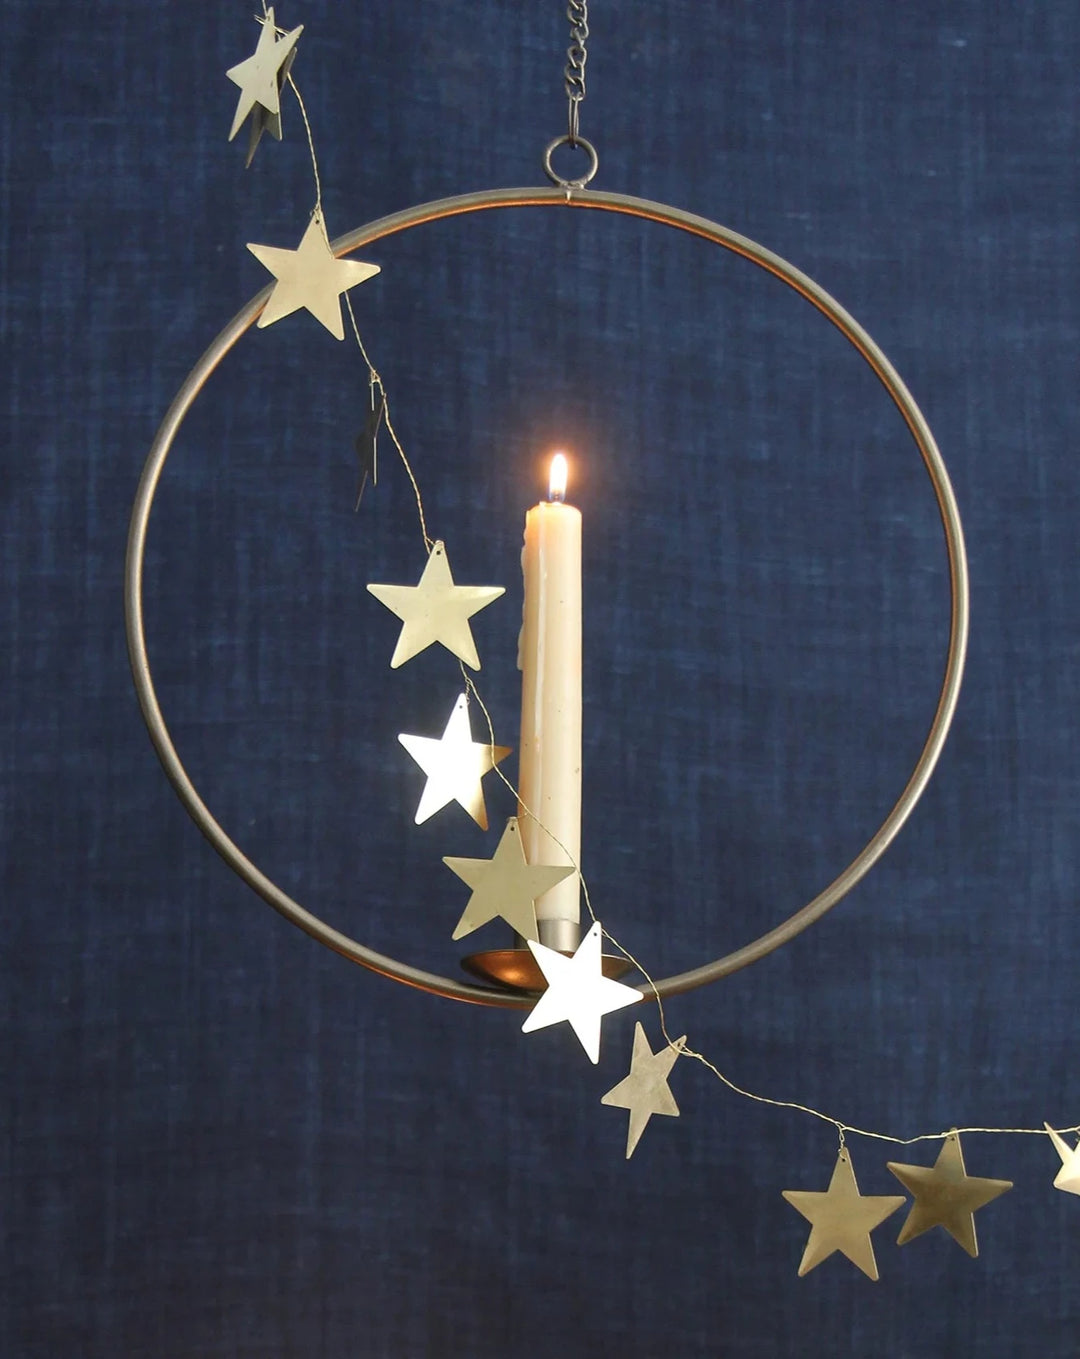 hanging brass ring candle holder with beeswax candle